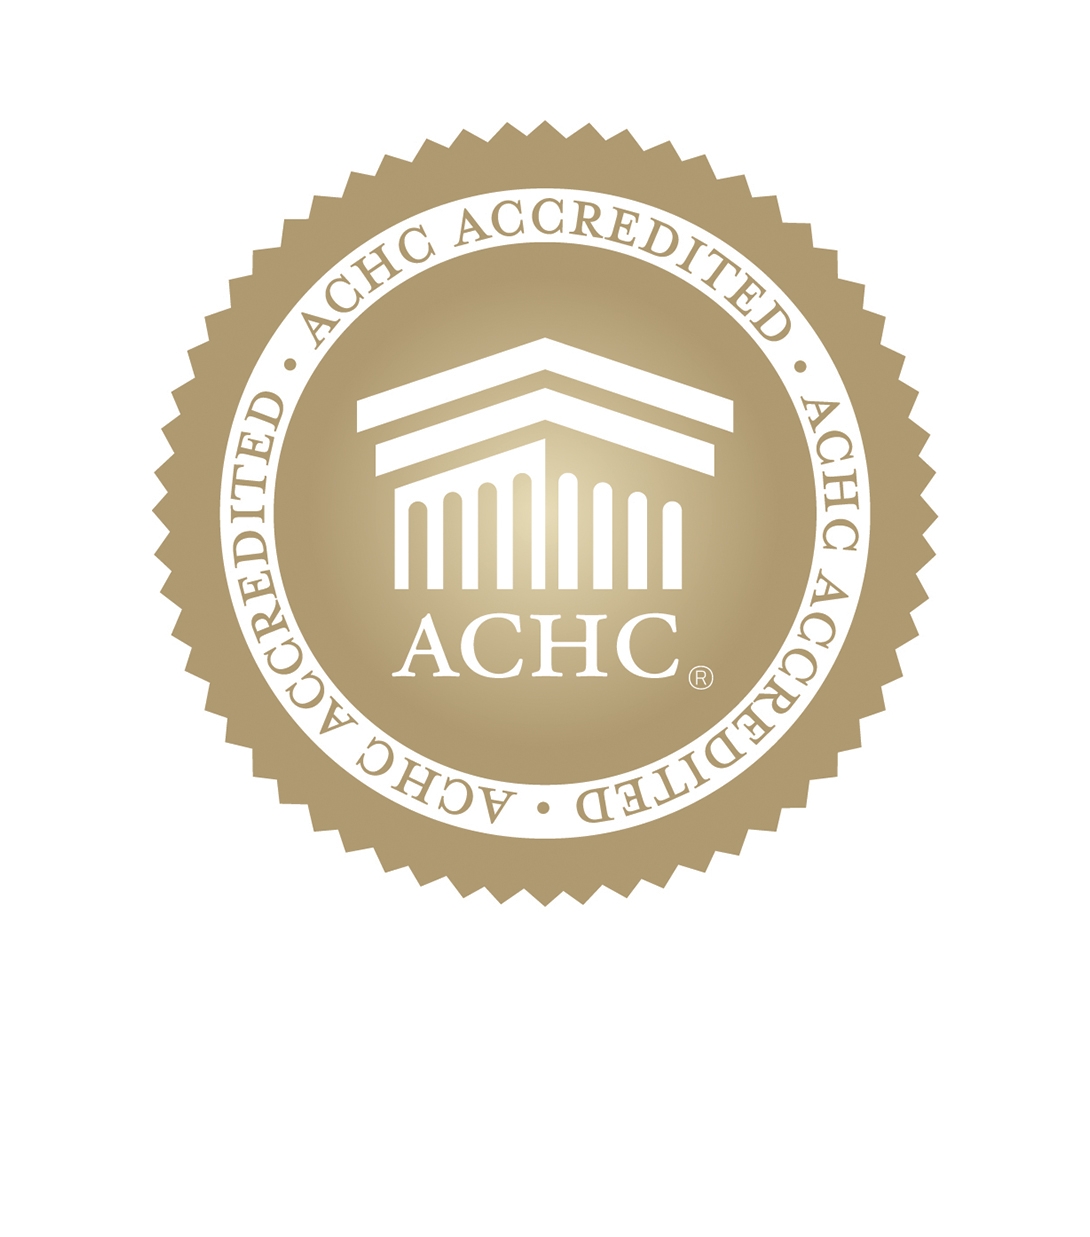 ACHC Accredited seal